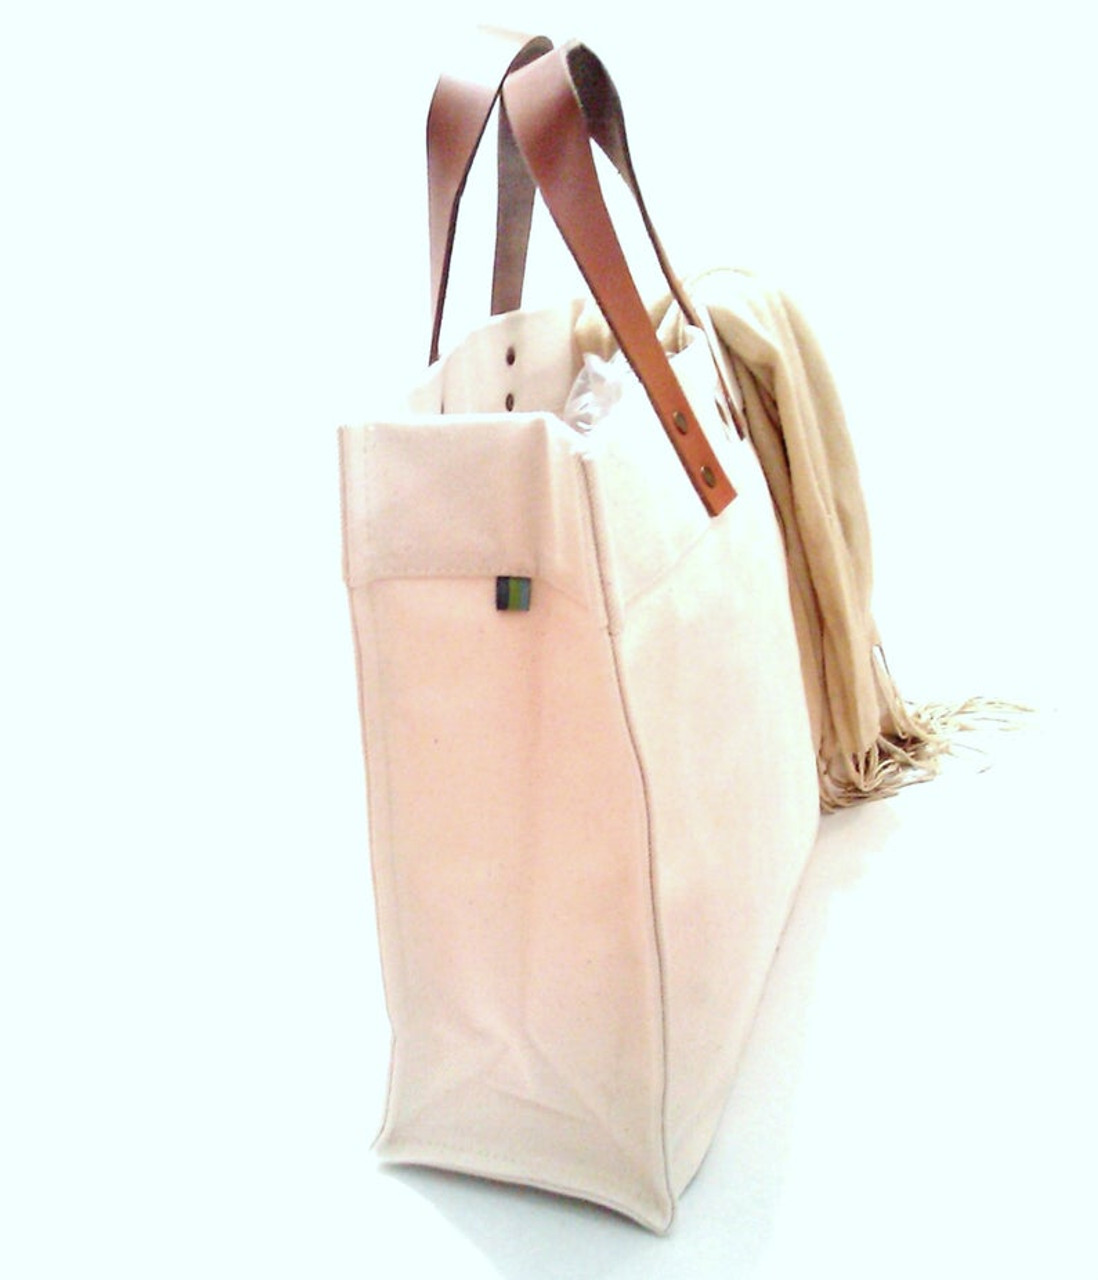 PERSONALIZED HEAVYWEIGHT CANVAS TOTE WITH LEATHER STRAPS